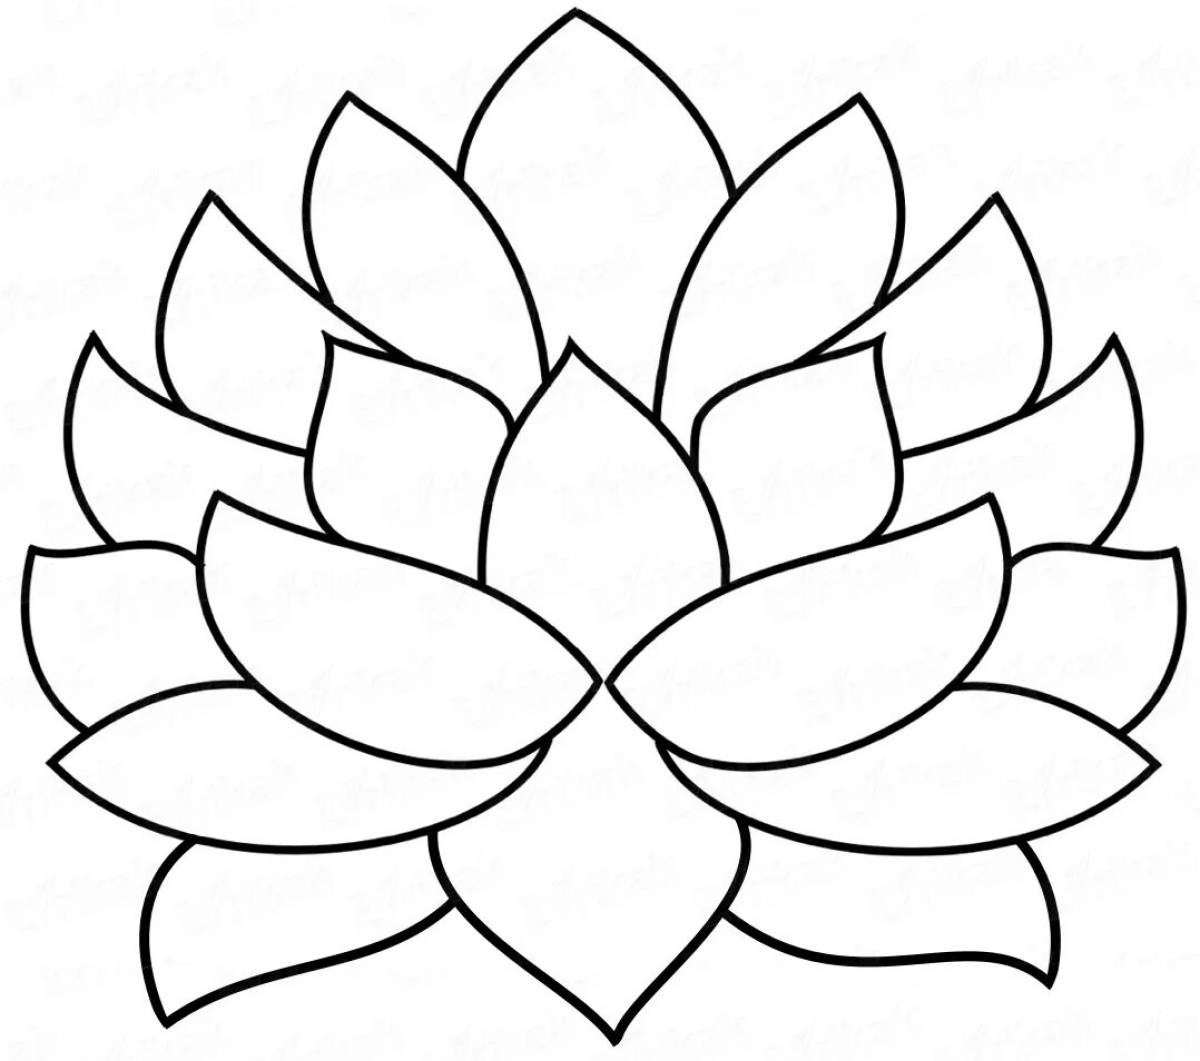 Fine stone flower coloring book for kids